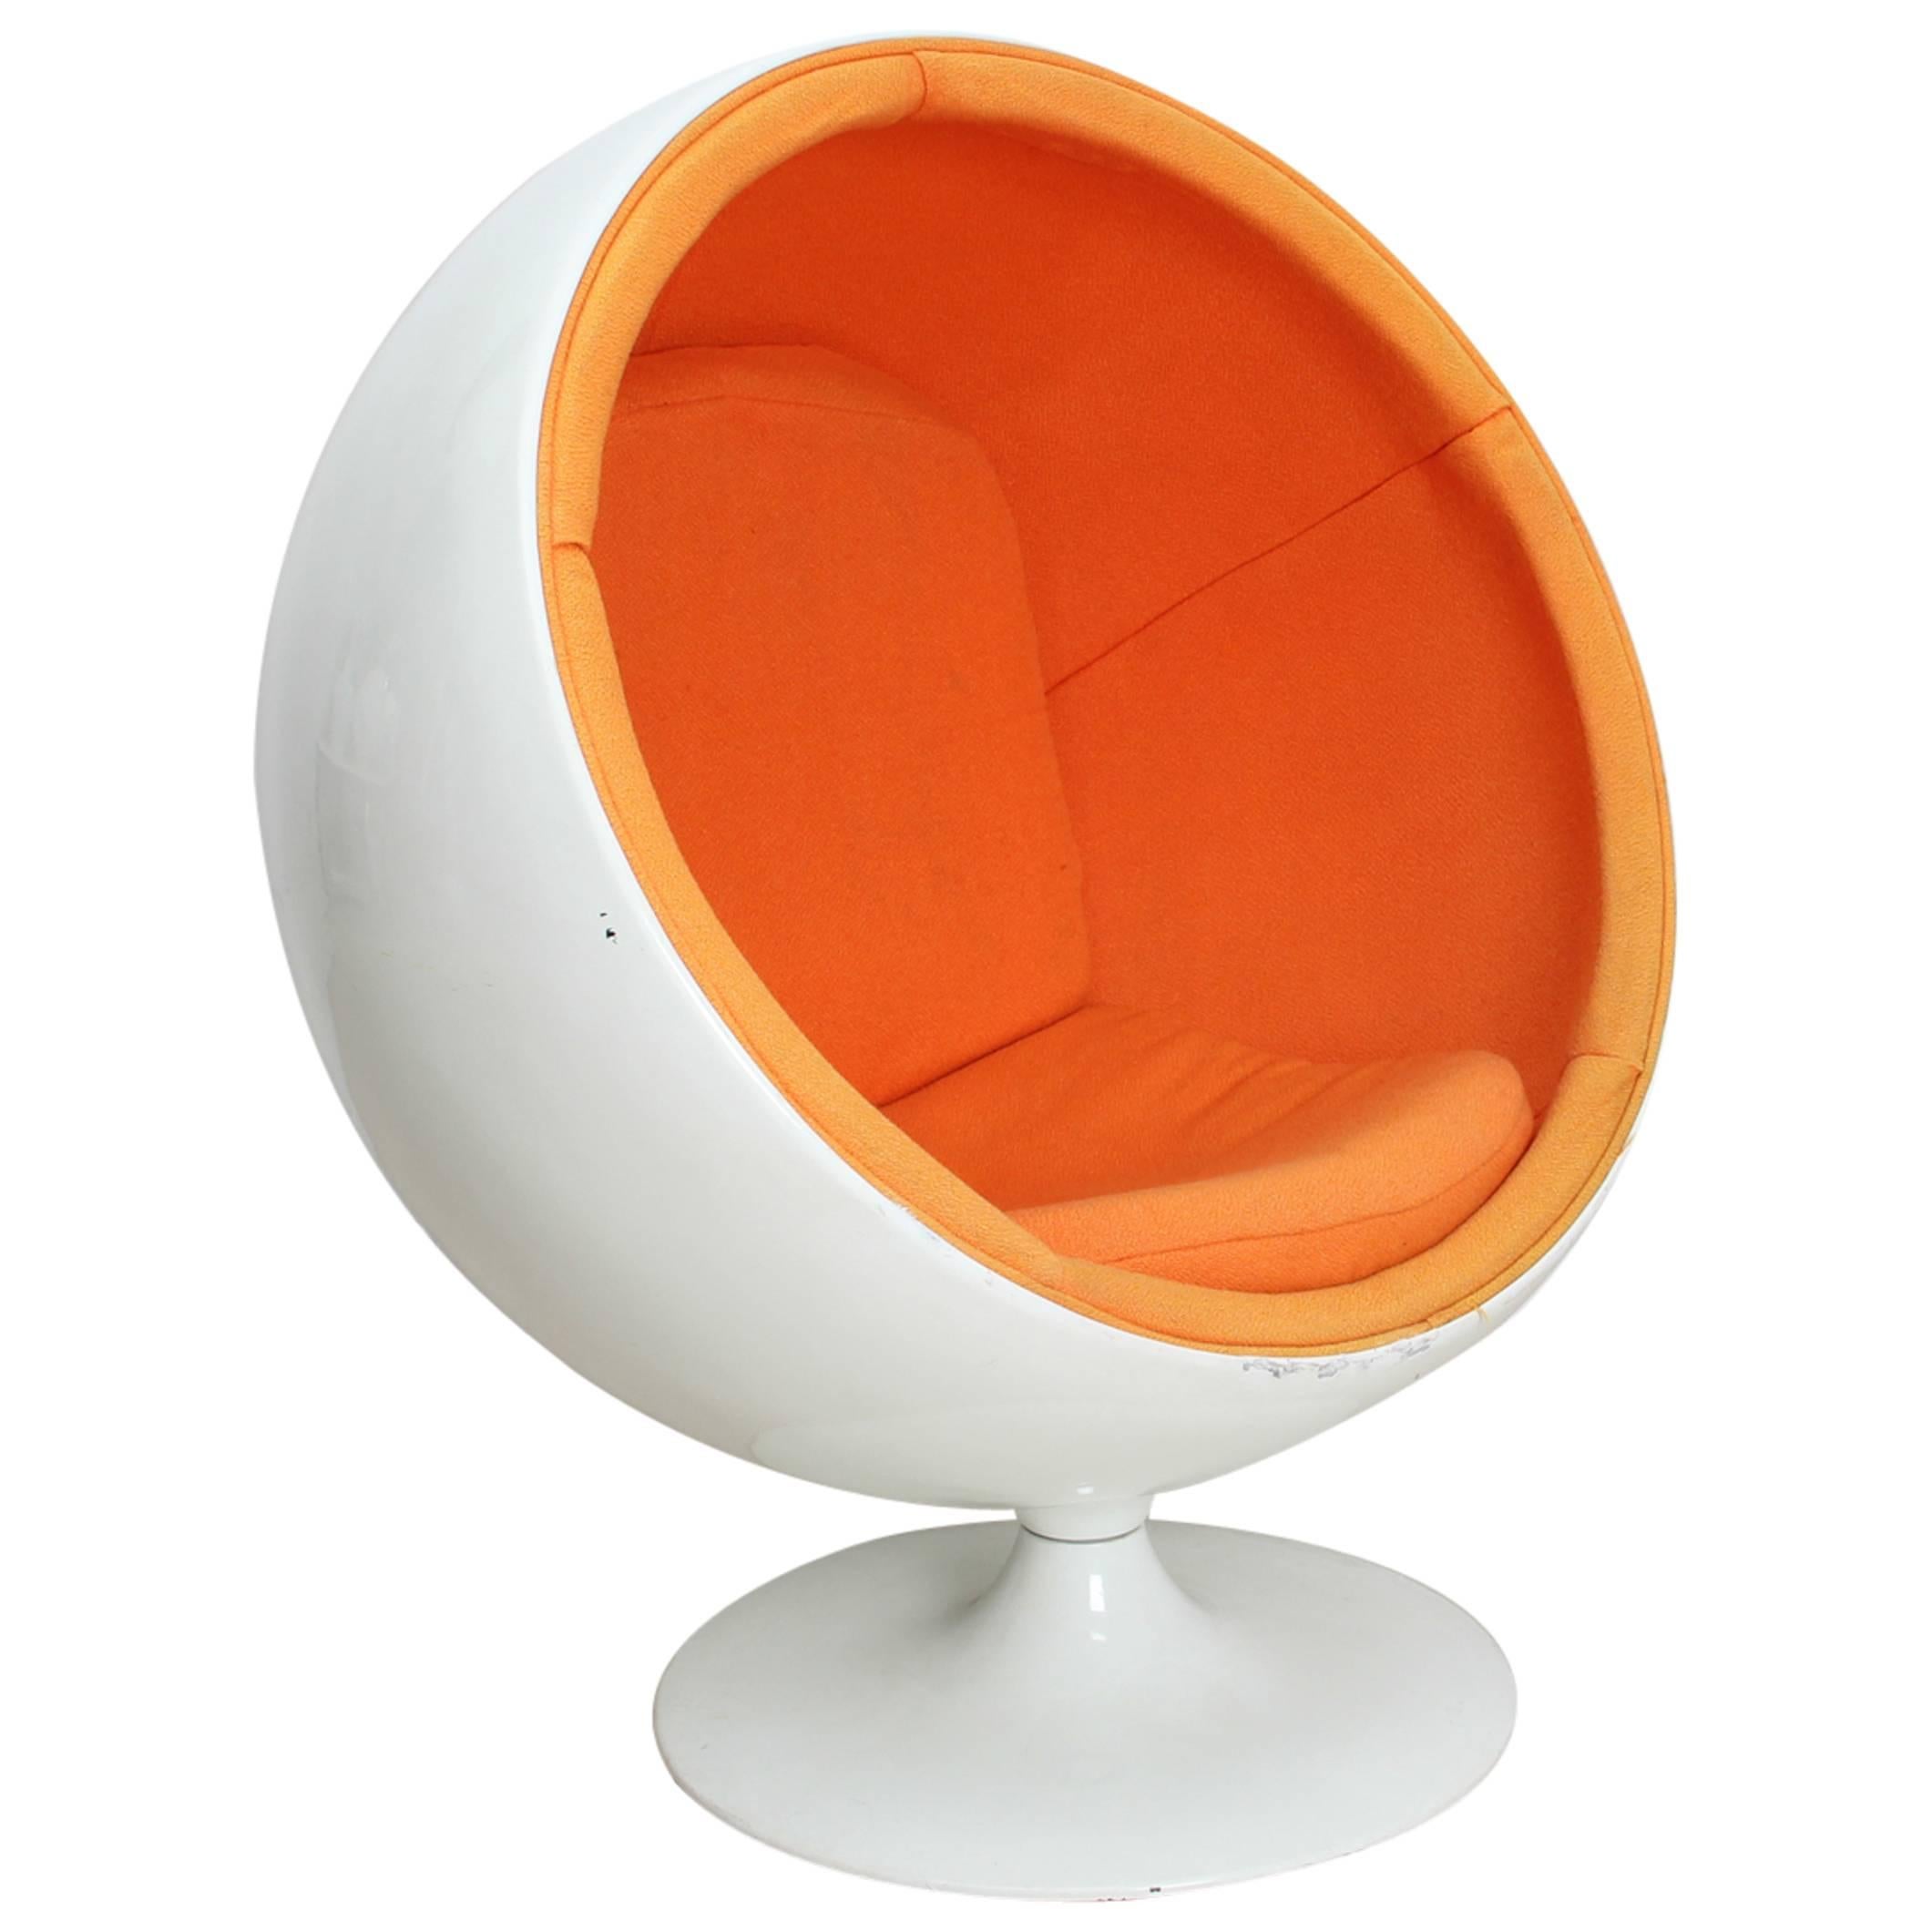 Ball Chair for Kids by Eero Aarnio Ed. Adelta, 1963